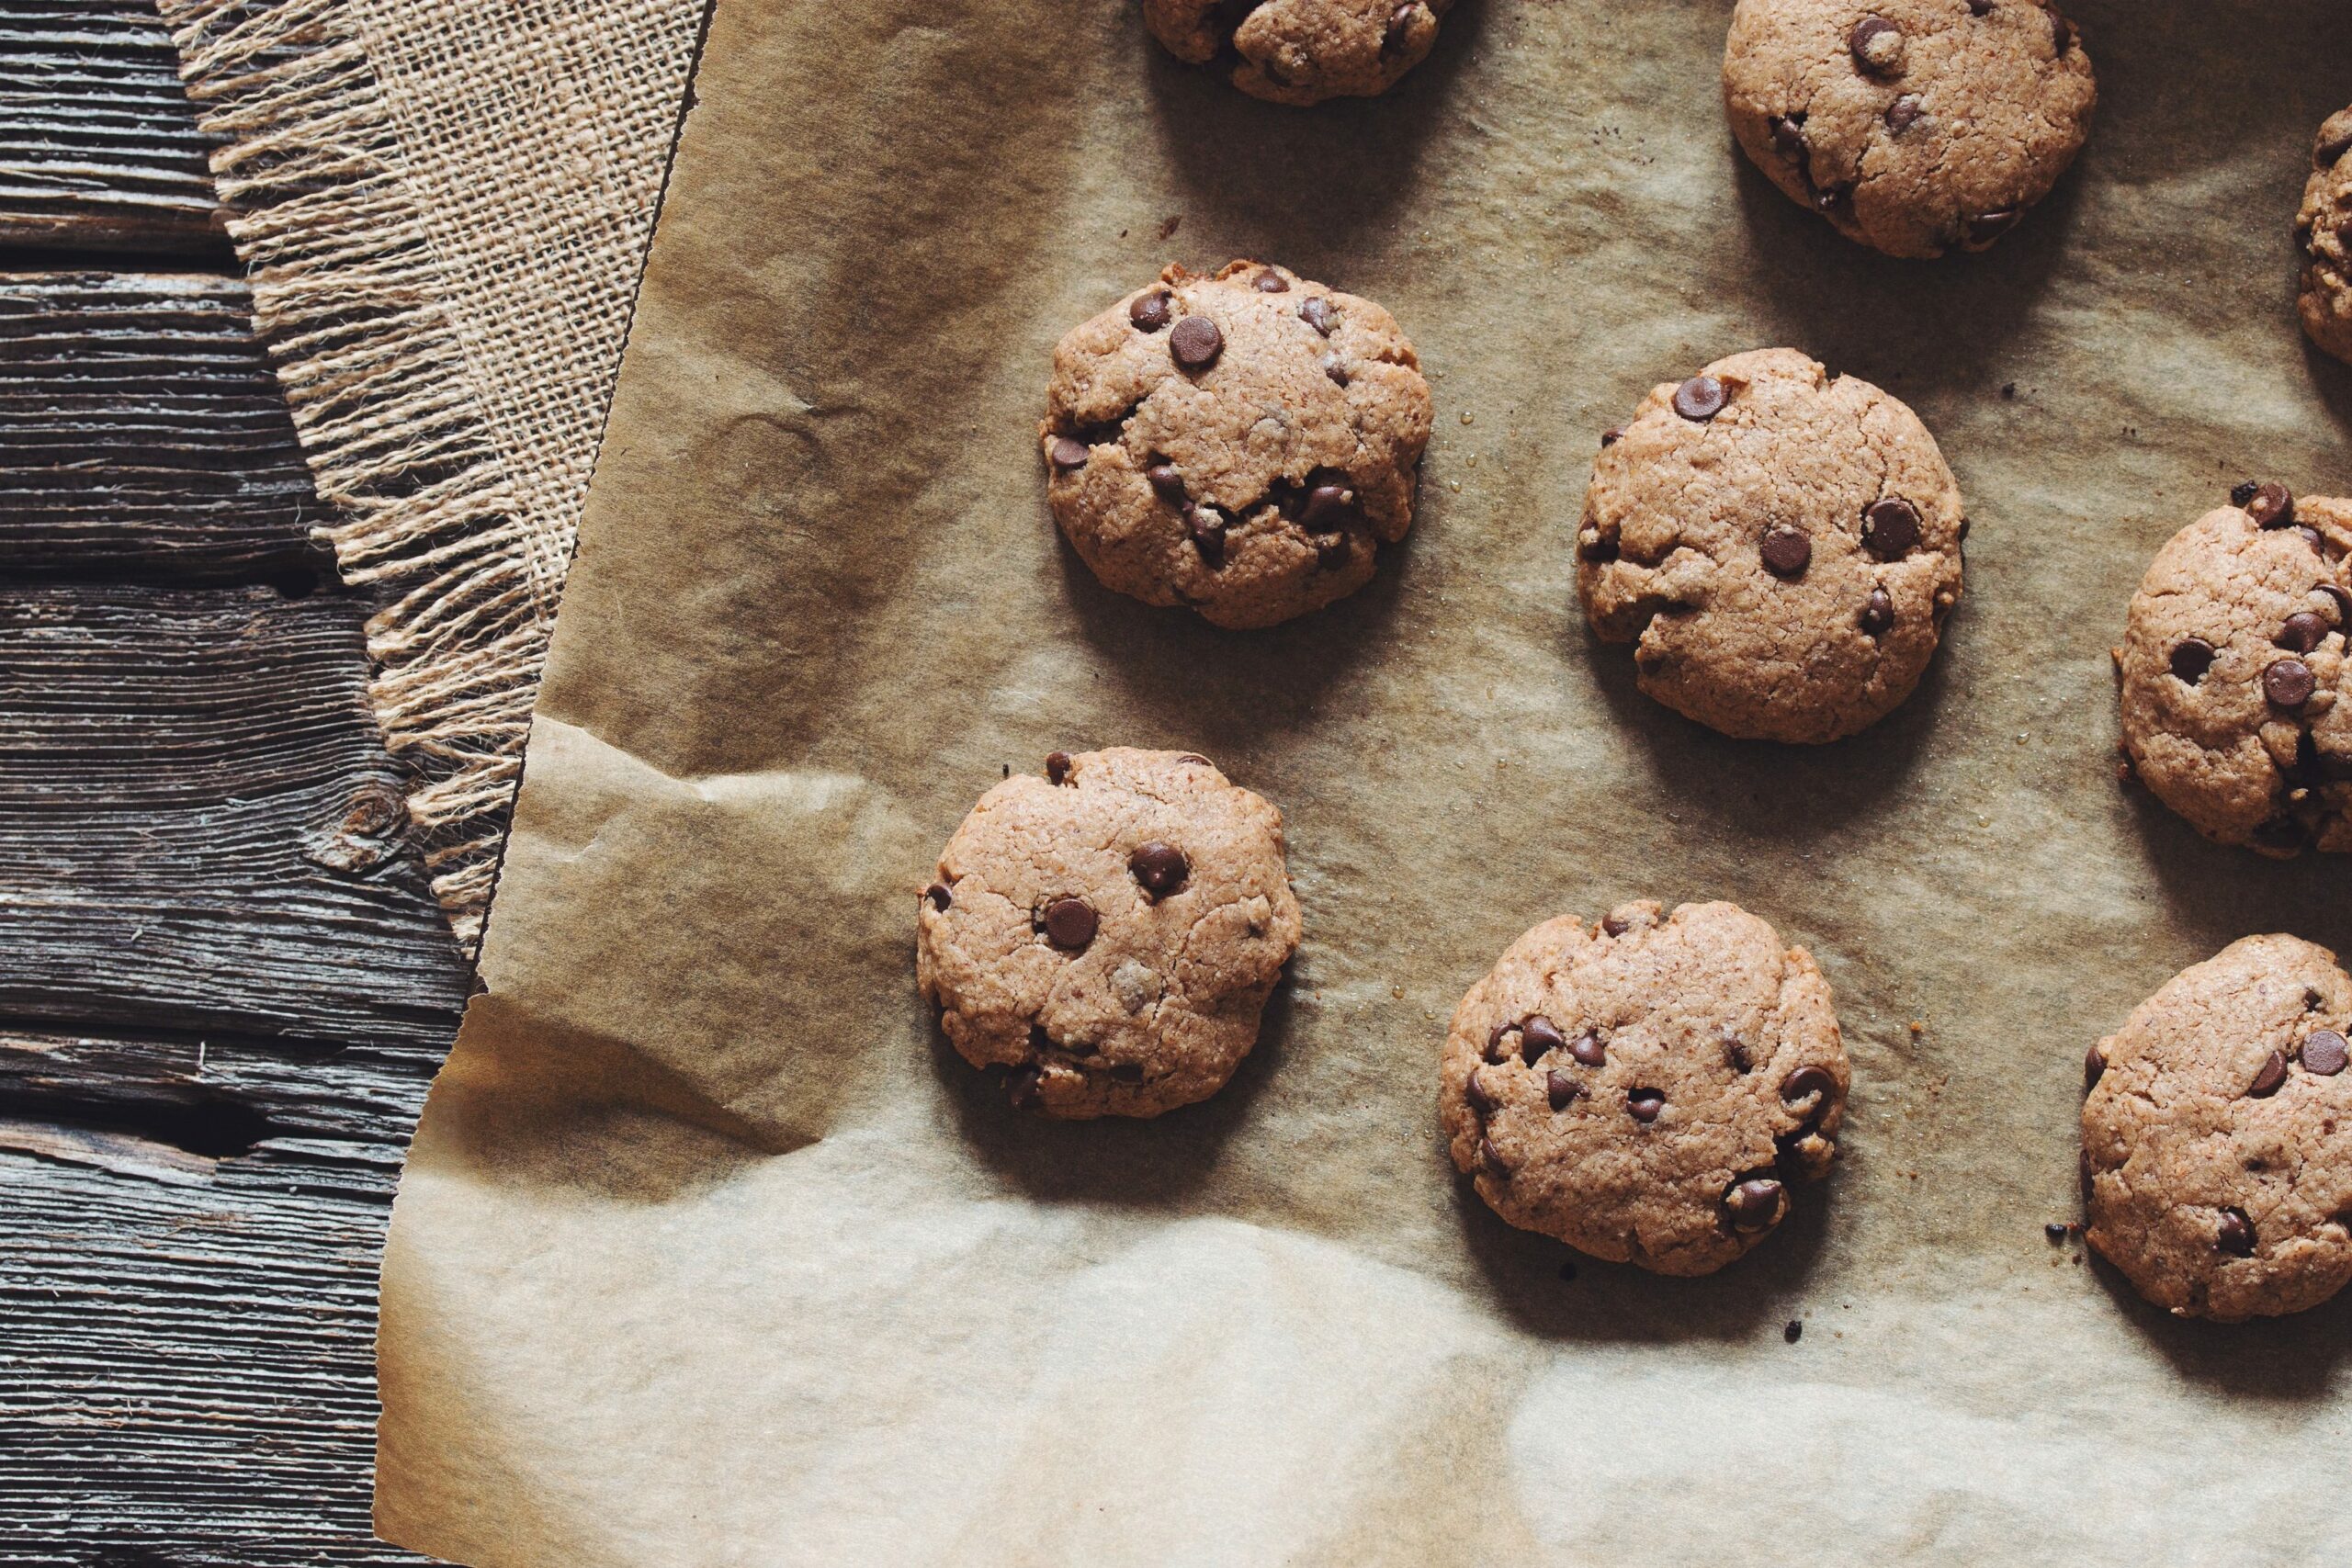 Chocolate Chip Almond Butter Cookies